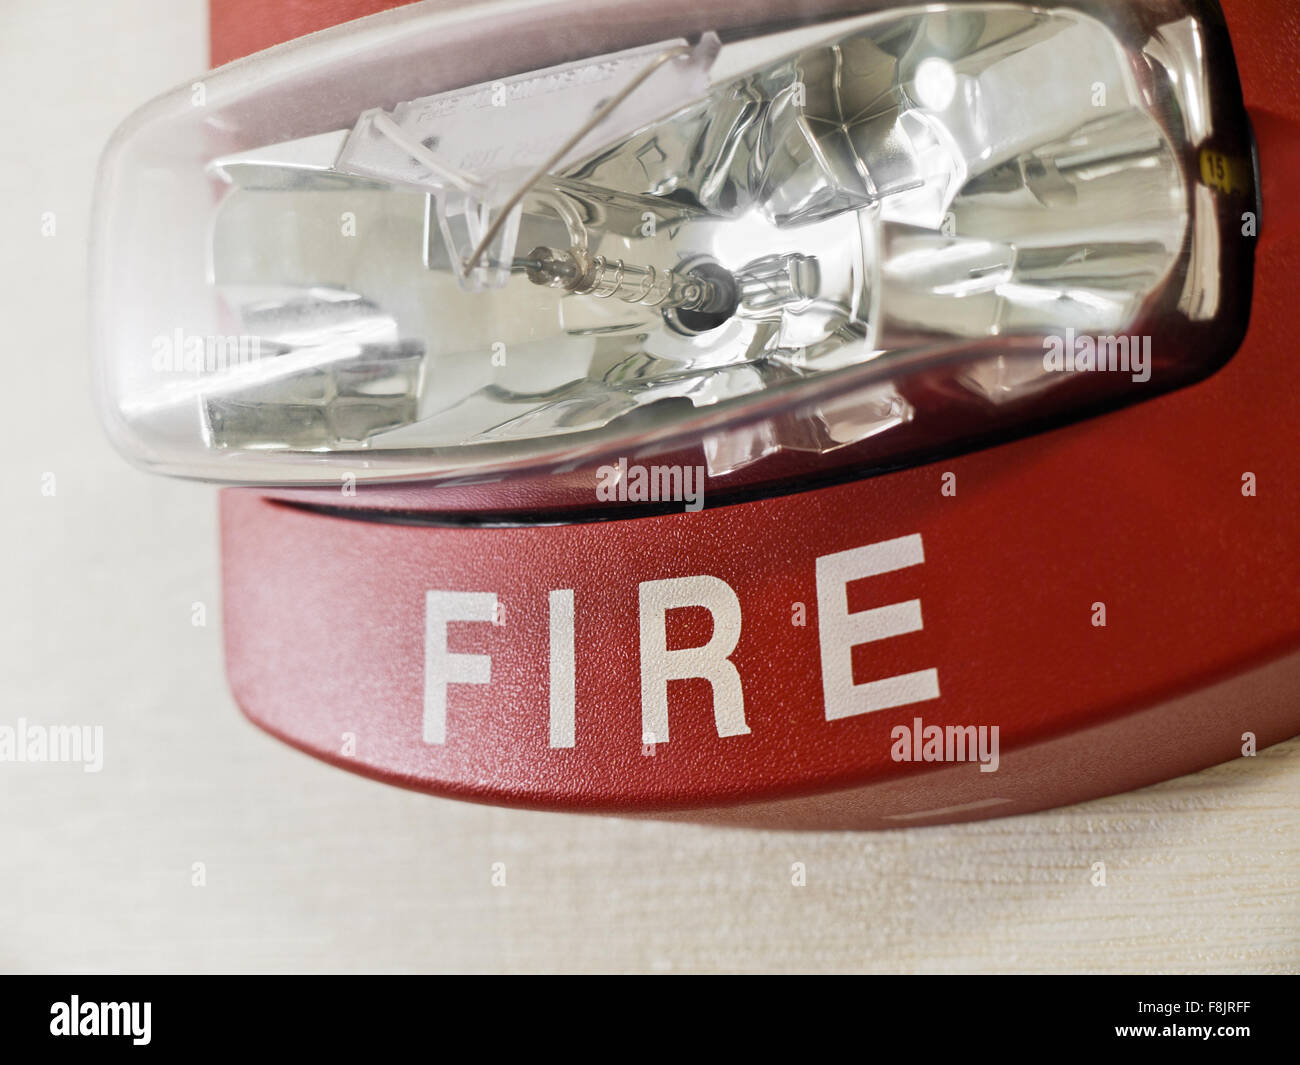 Red fire alarm smoke detector with strobe light mounted on a wall as part of a fire protection system. Stock Photo